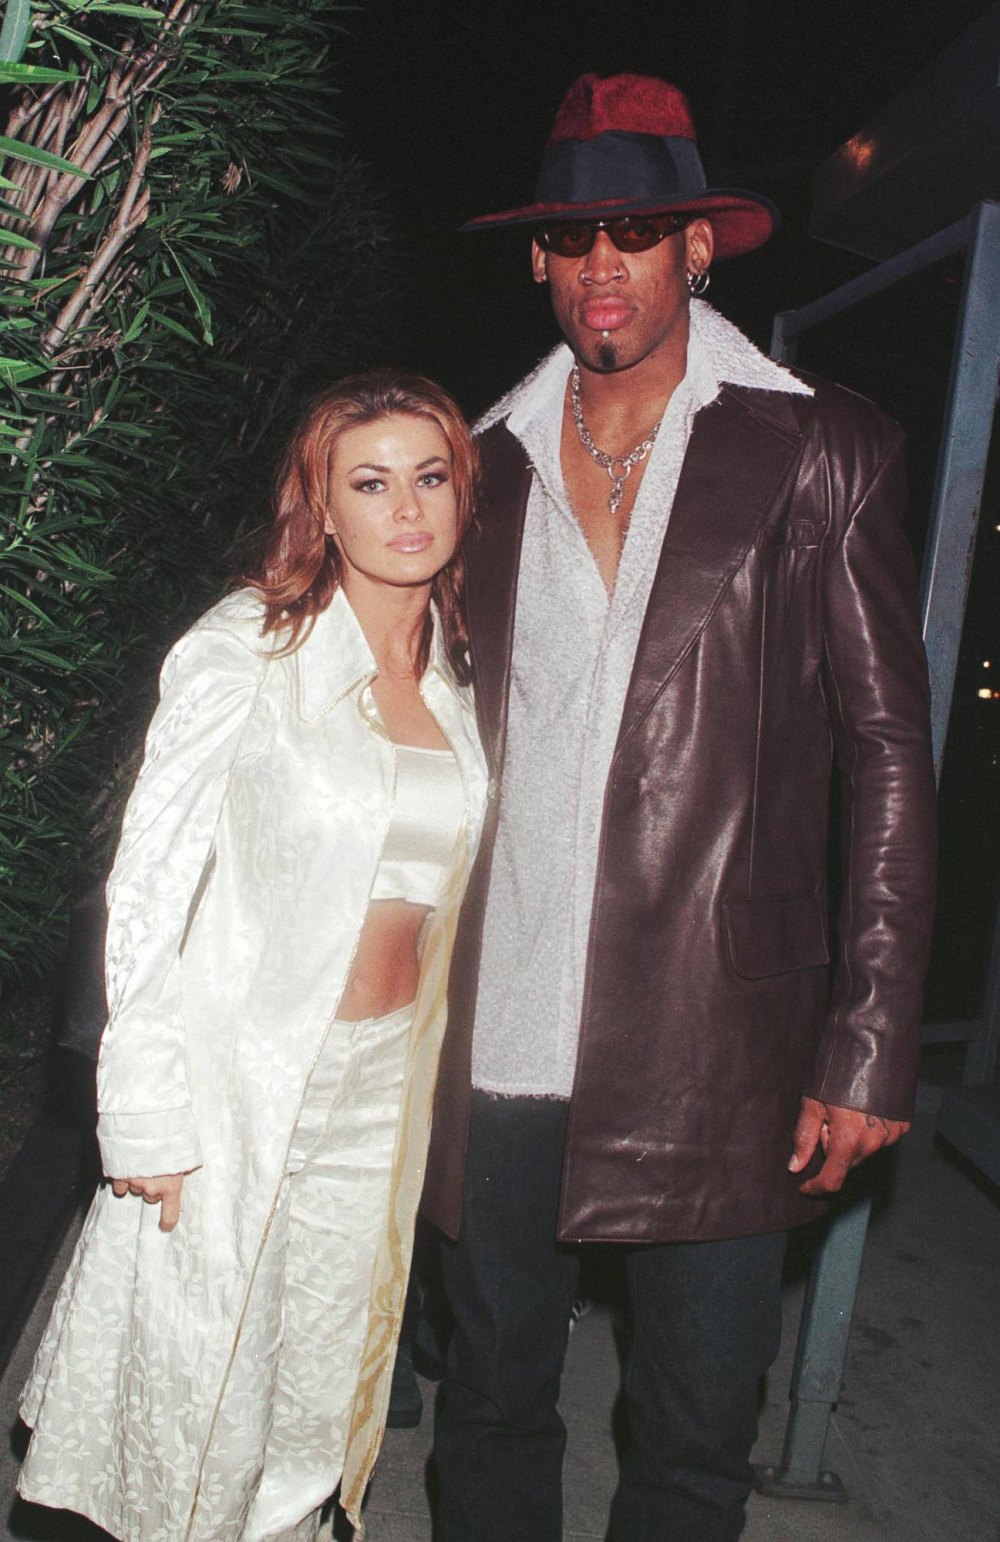 Gerry Turner and Theresa Nist are not alone 11 celebrity couples who were married for less than 100 days 658 Carmen Electra and Dennis Rodman